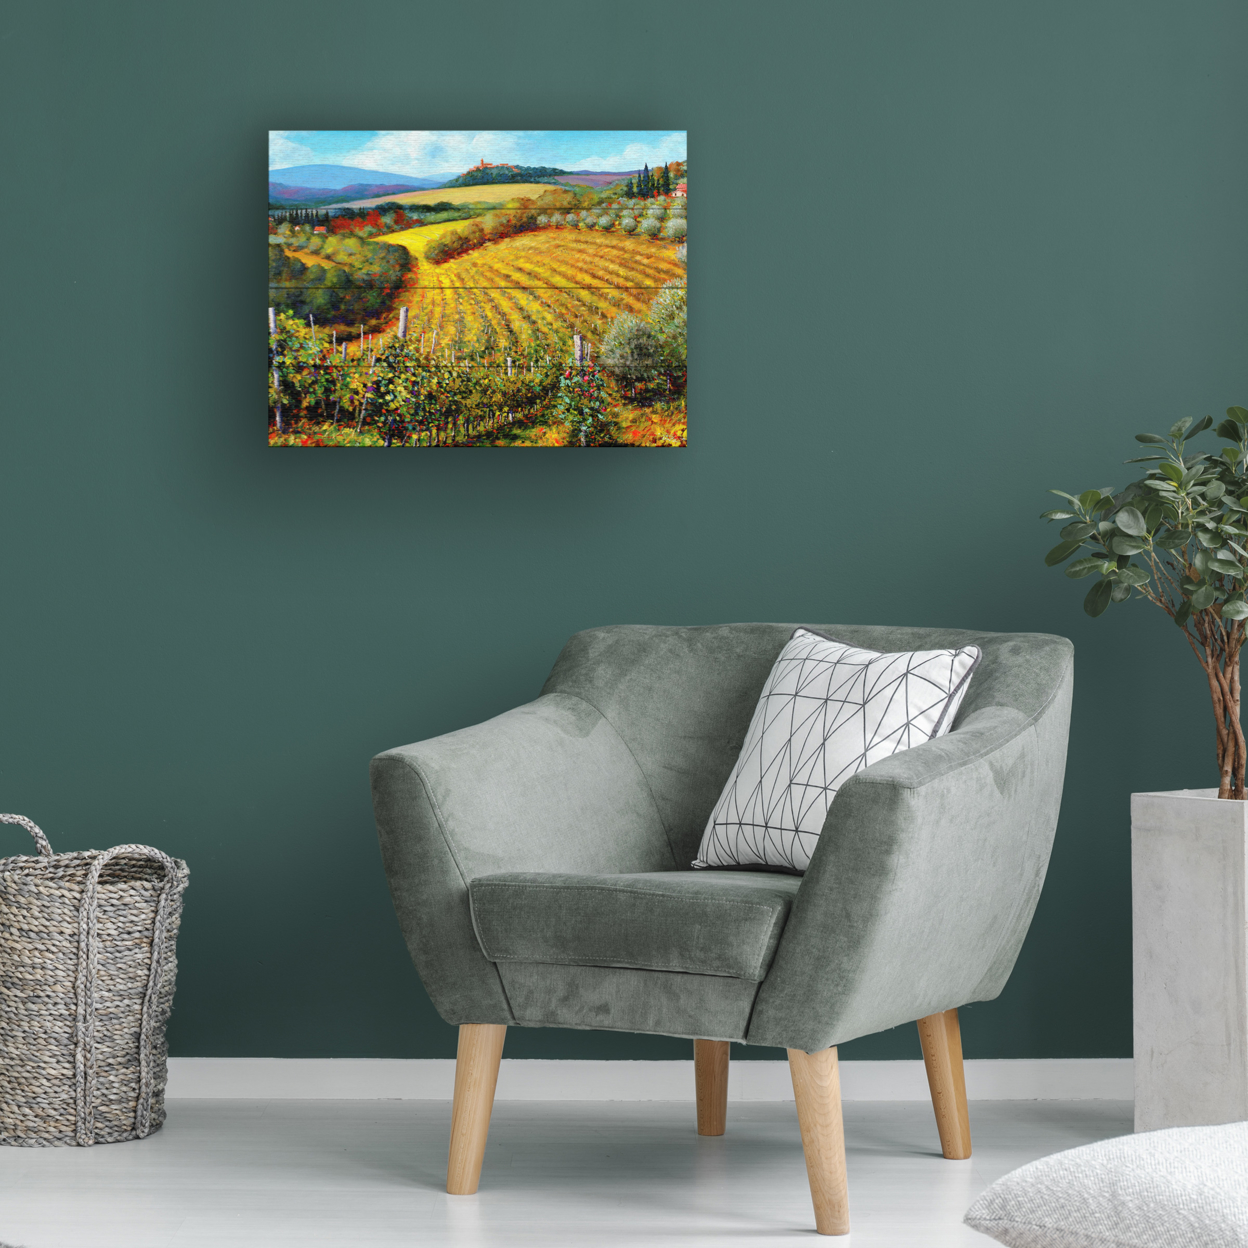 Wall Art 12 X 16 Inches Titled Chianti Vineyards Ready To Hang Printed On Wooden Planks